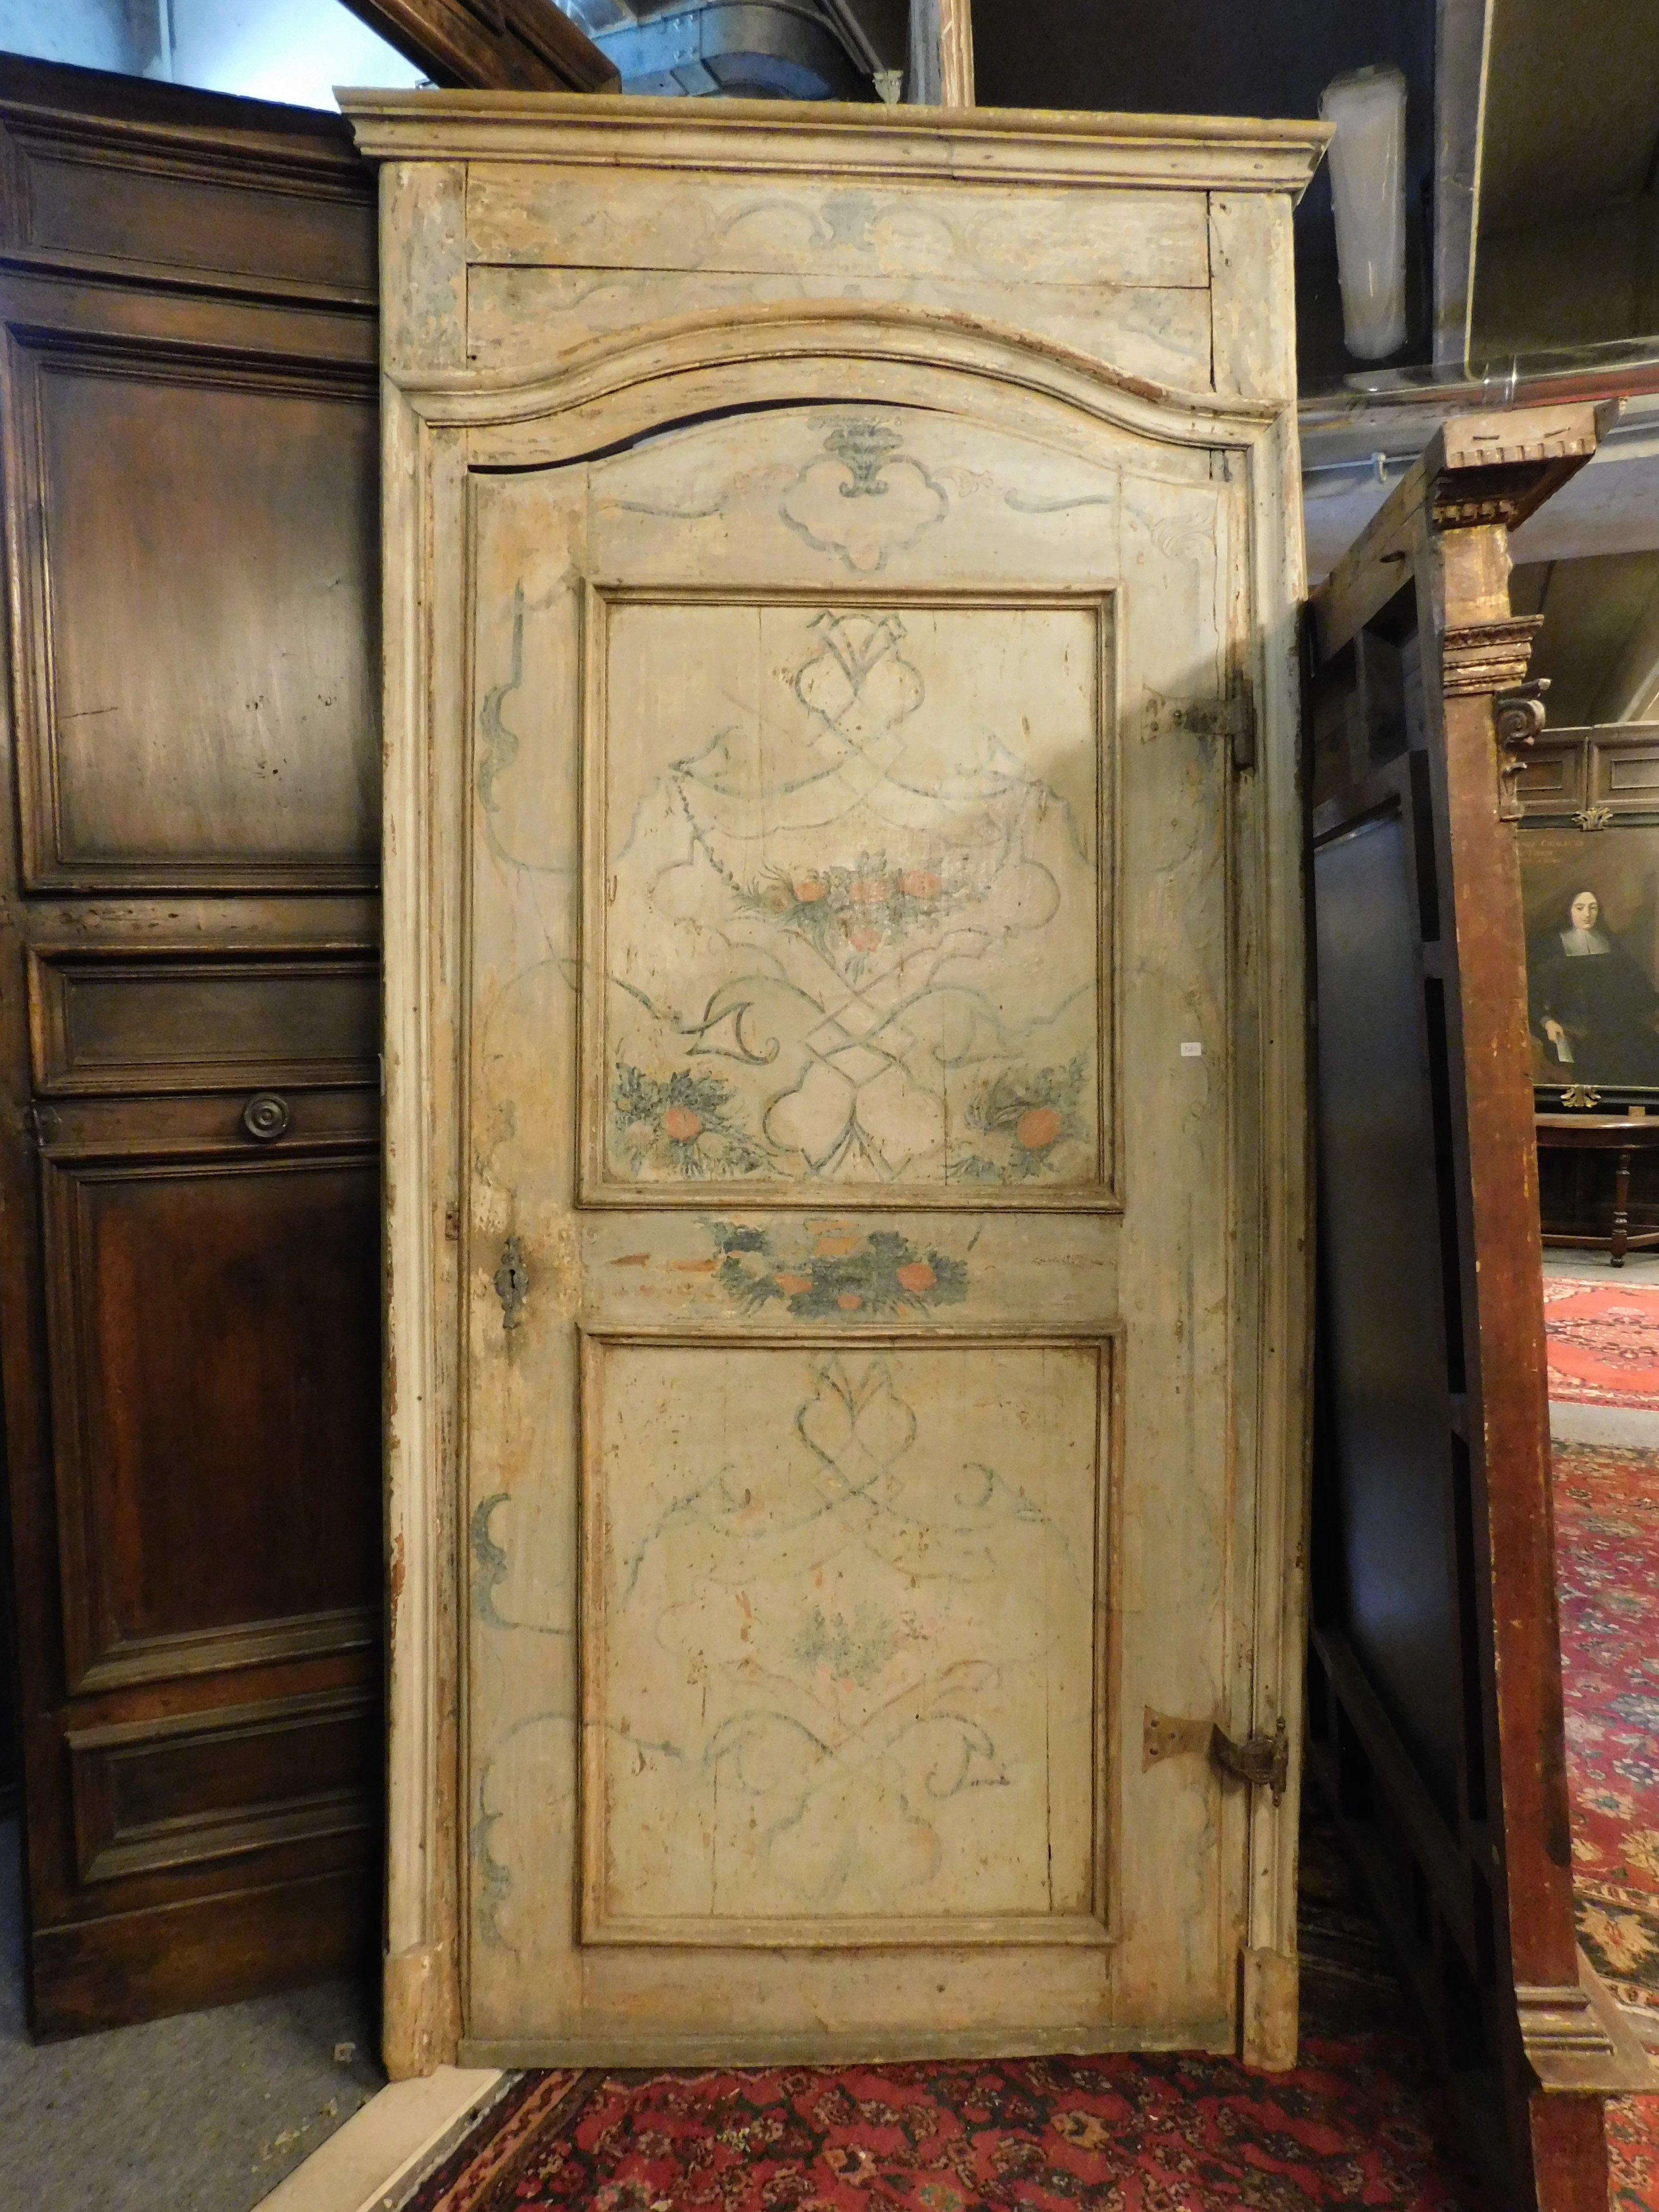 set of 2 antique interior doors, painted and lacquered by hand with floral decorations, complete with original frame, also lacquered on the back, to be minimally restored, early 18th century, from Italy.
Sold separately, discount possible if you buy